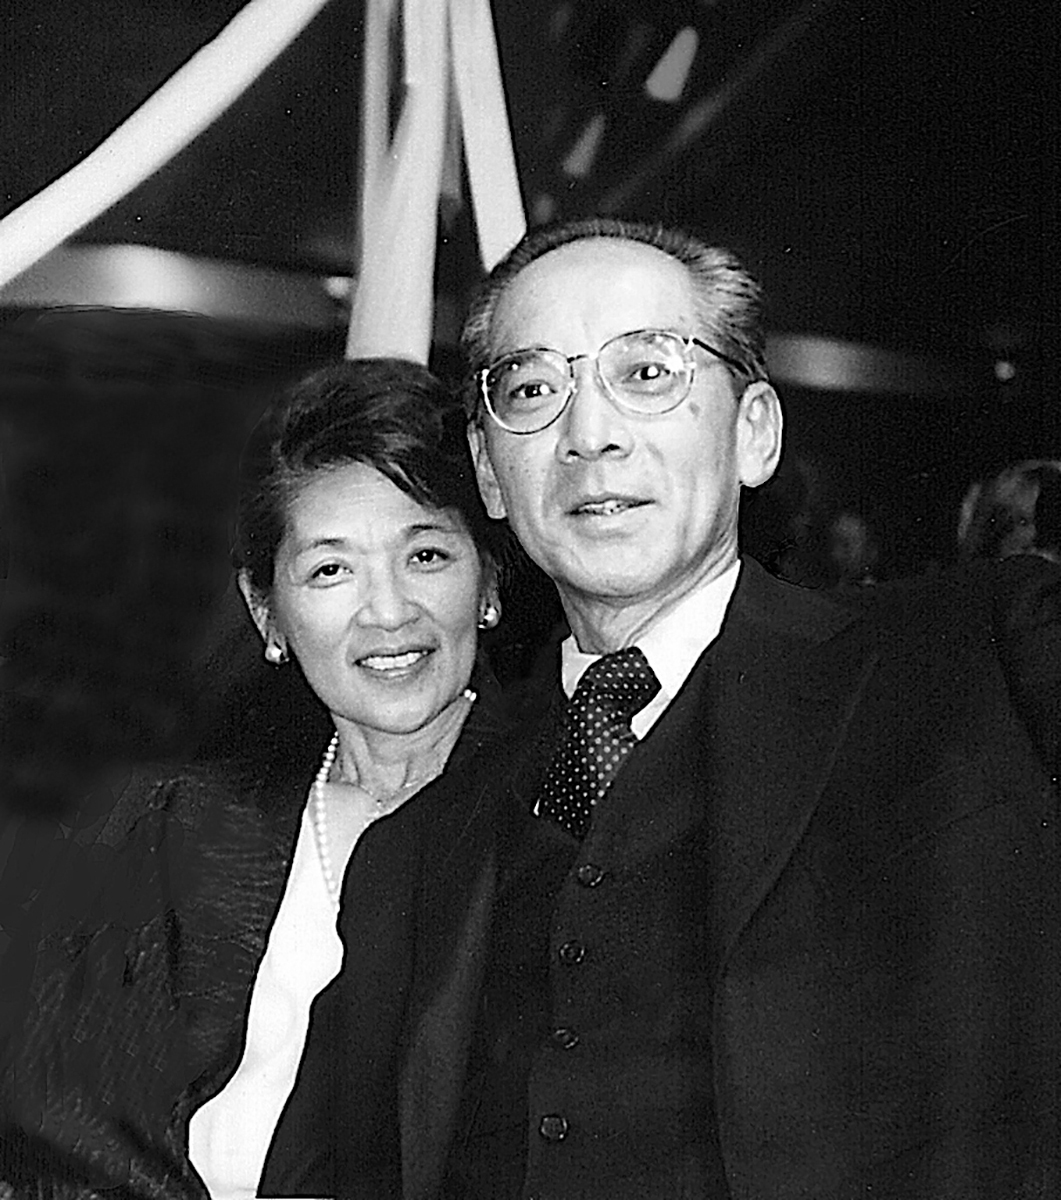 Emma Gee and Yuji Ichioka among charter founders and early supporters honored in 1999 at the 30th anniversary celebration of the establishment of the Asian American Studies Center at UCLA. (Courtesy of UCLA Asian American Studies Center)